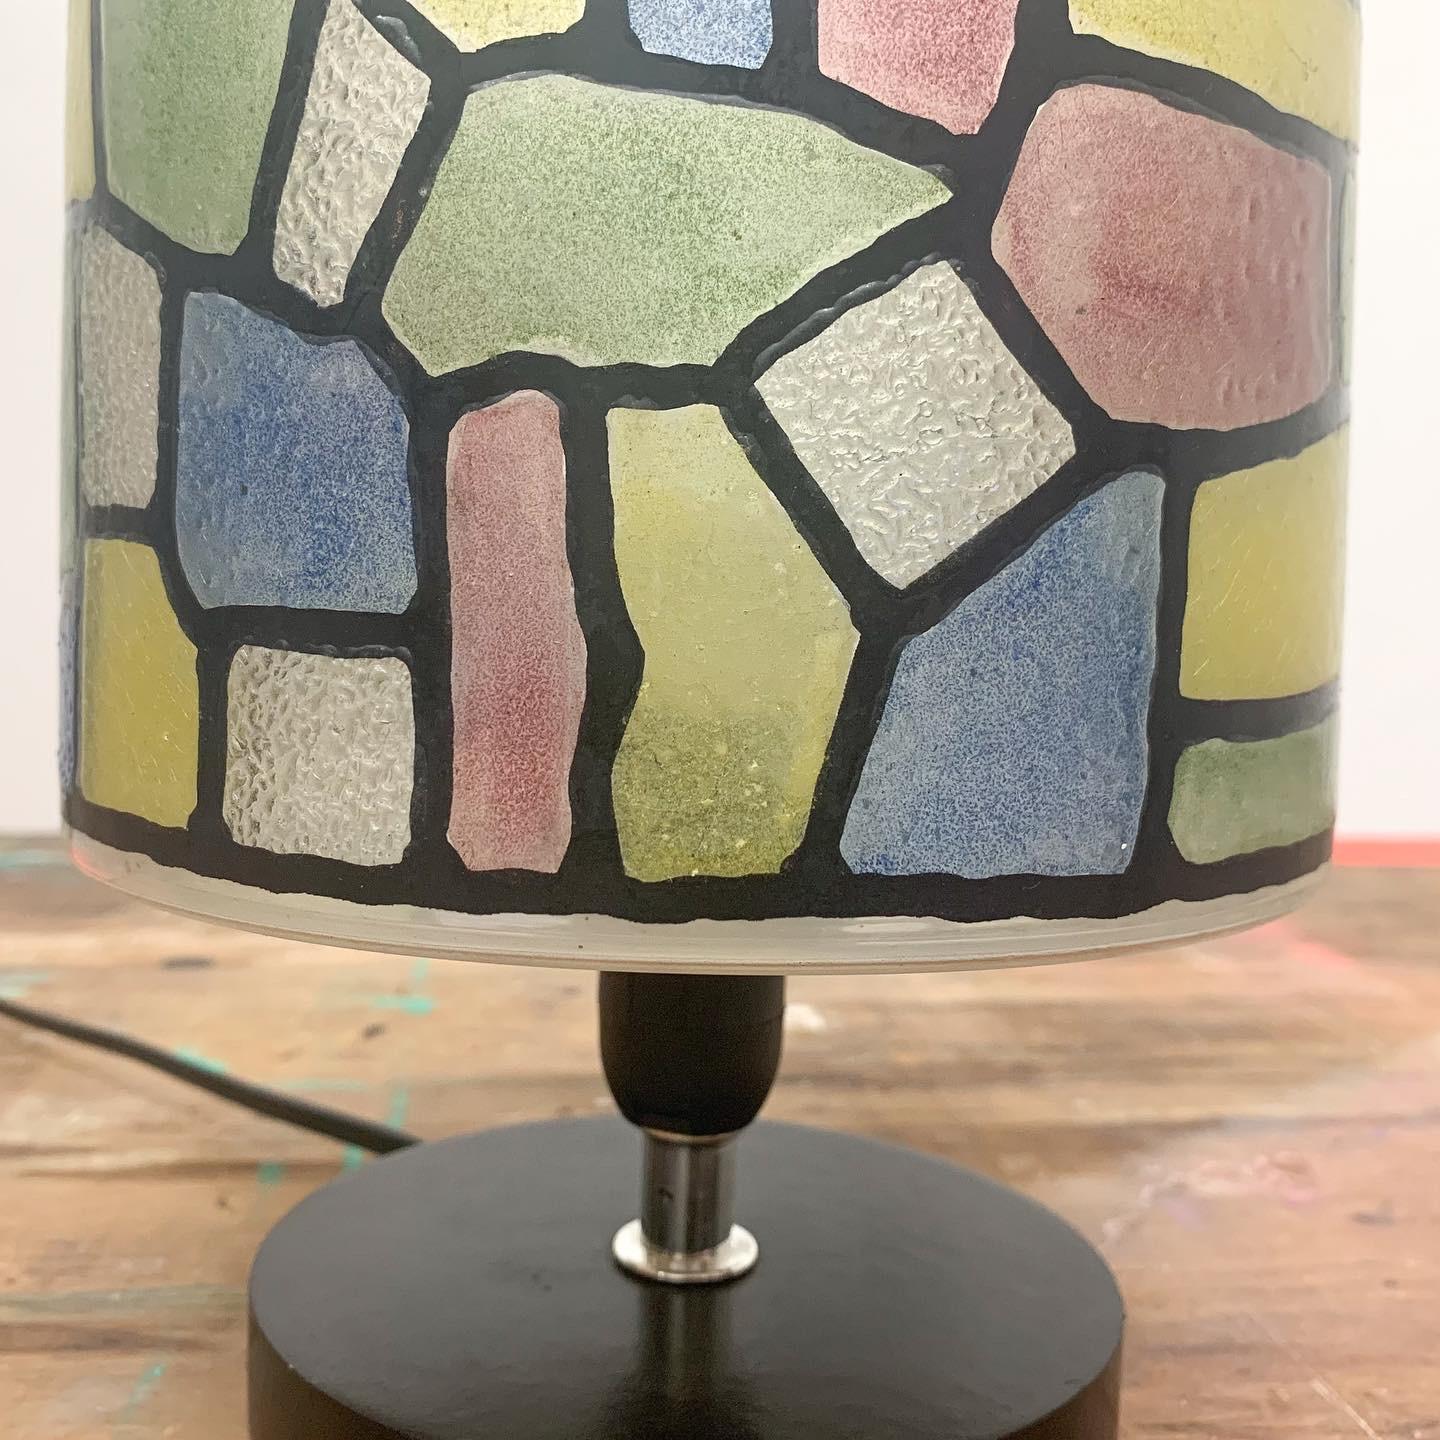 Late 20th Century Small Art Deco Style Table Lamp With Stained Glass Shade - British, C1990s For Sale